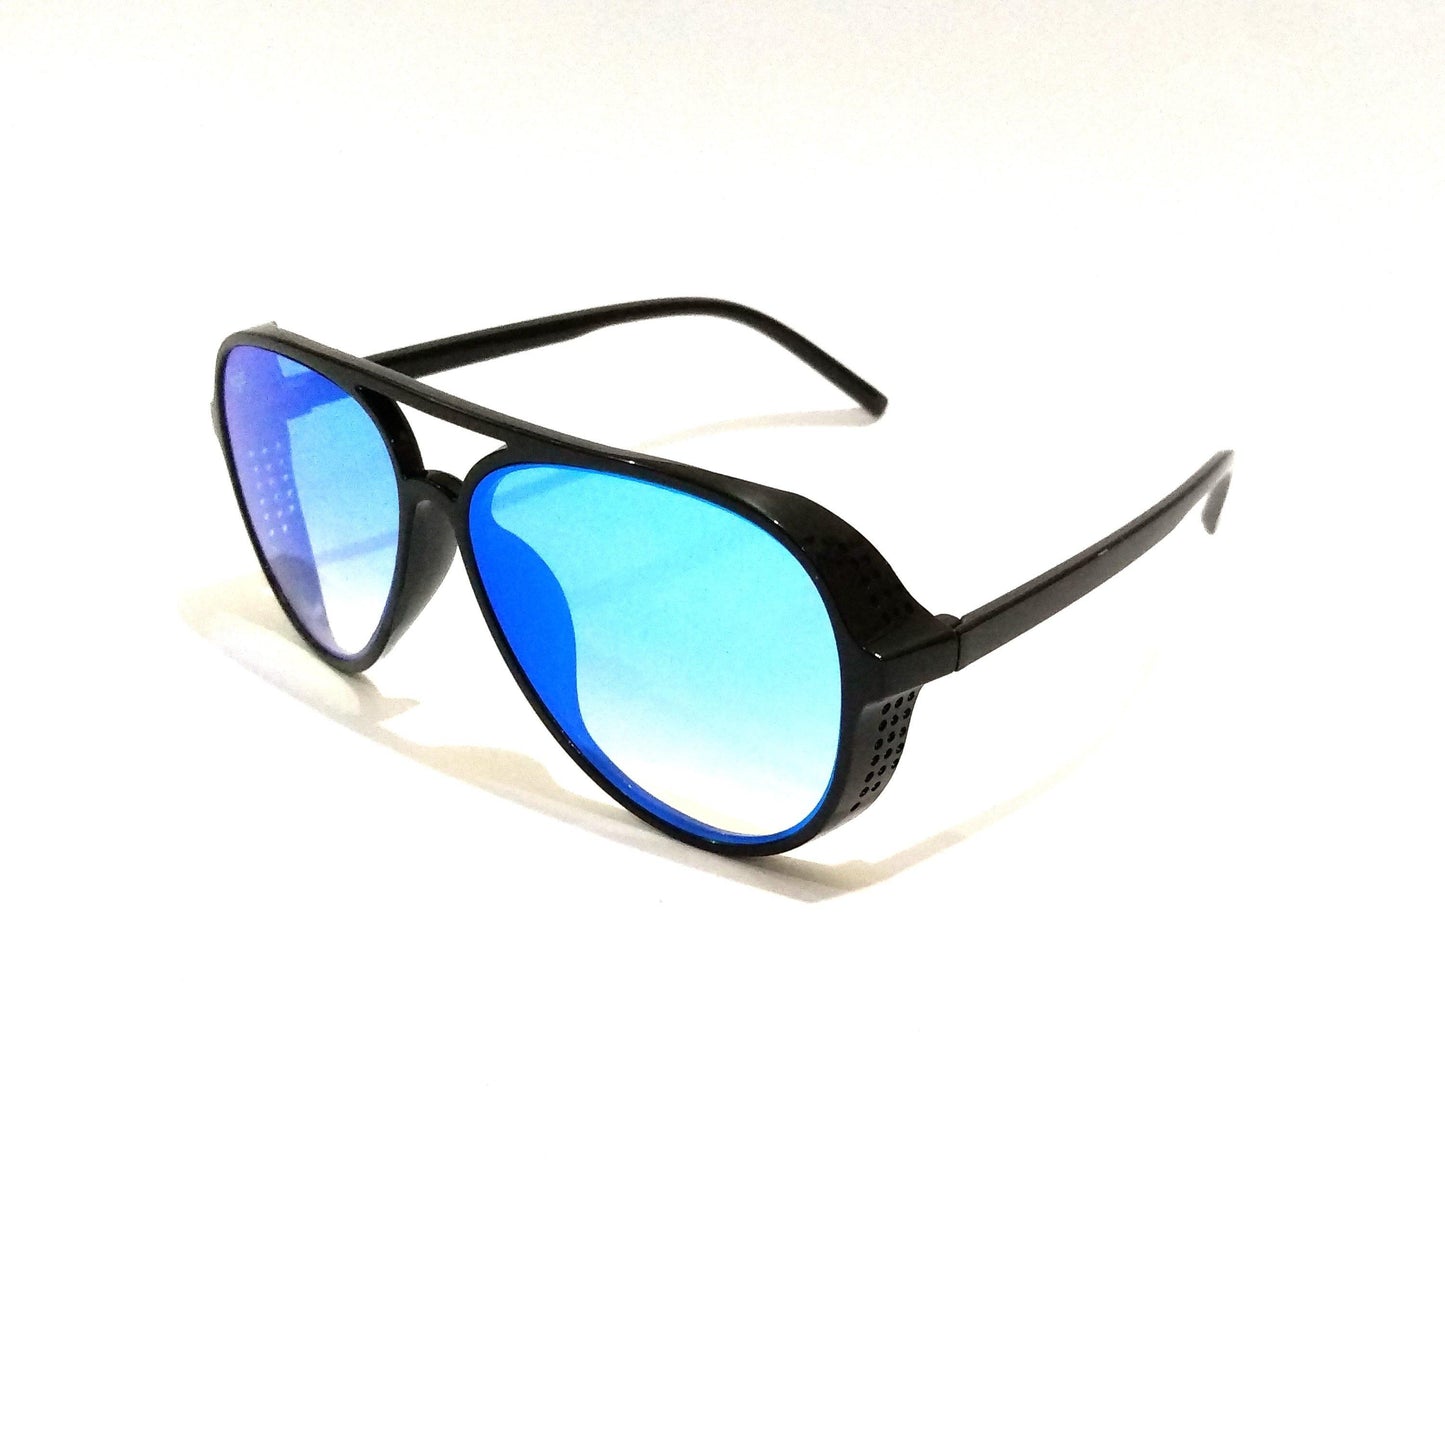 Buy Blue Mirror Steampunk Aviator Sunglasses for Men - Glasses India Online in India